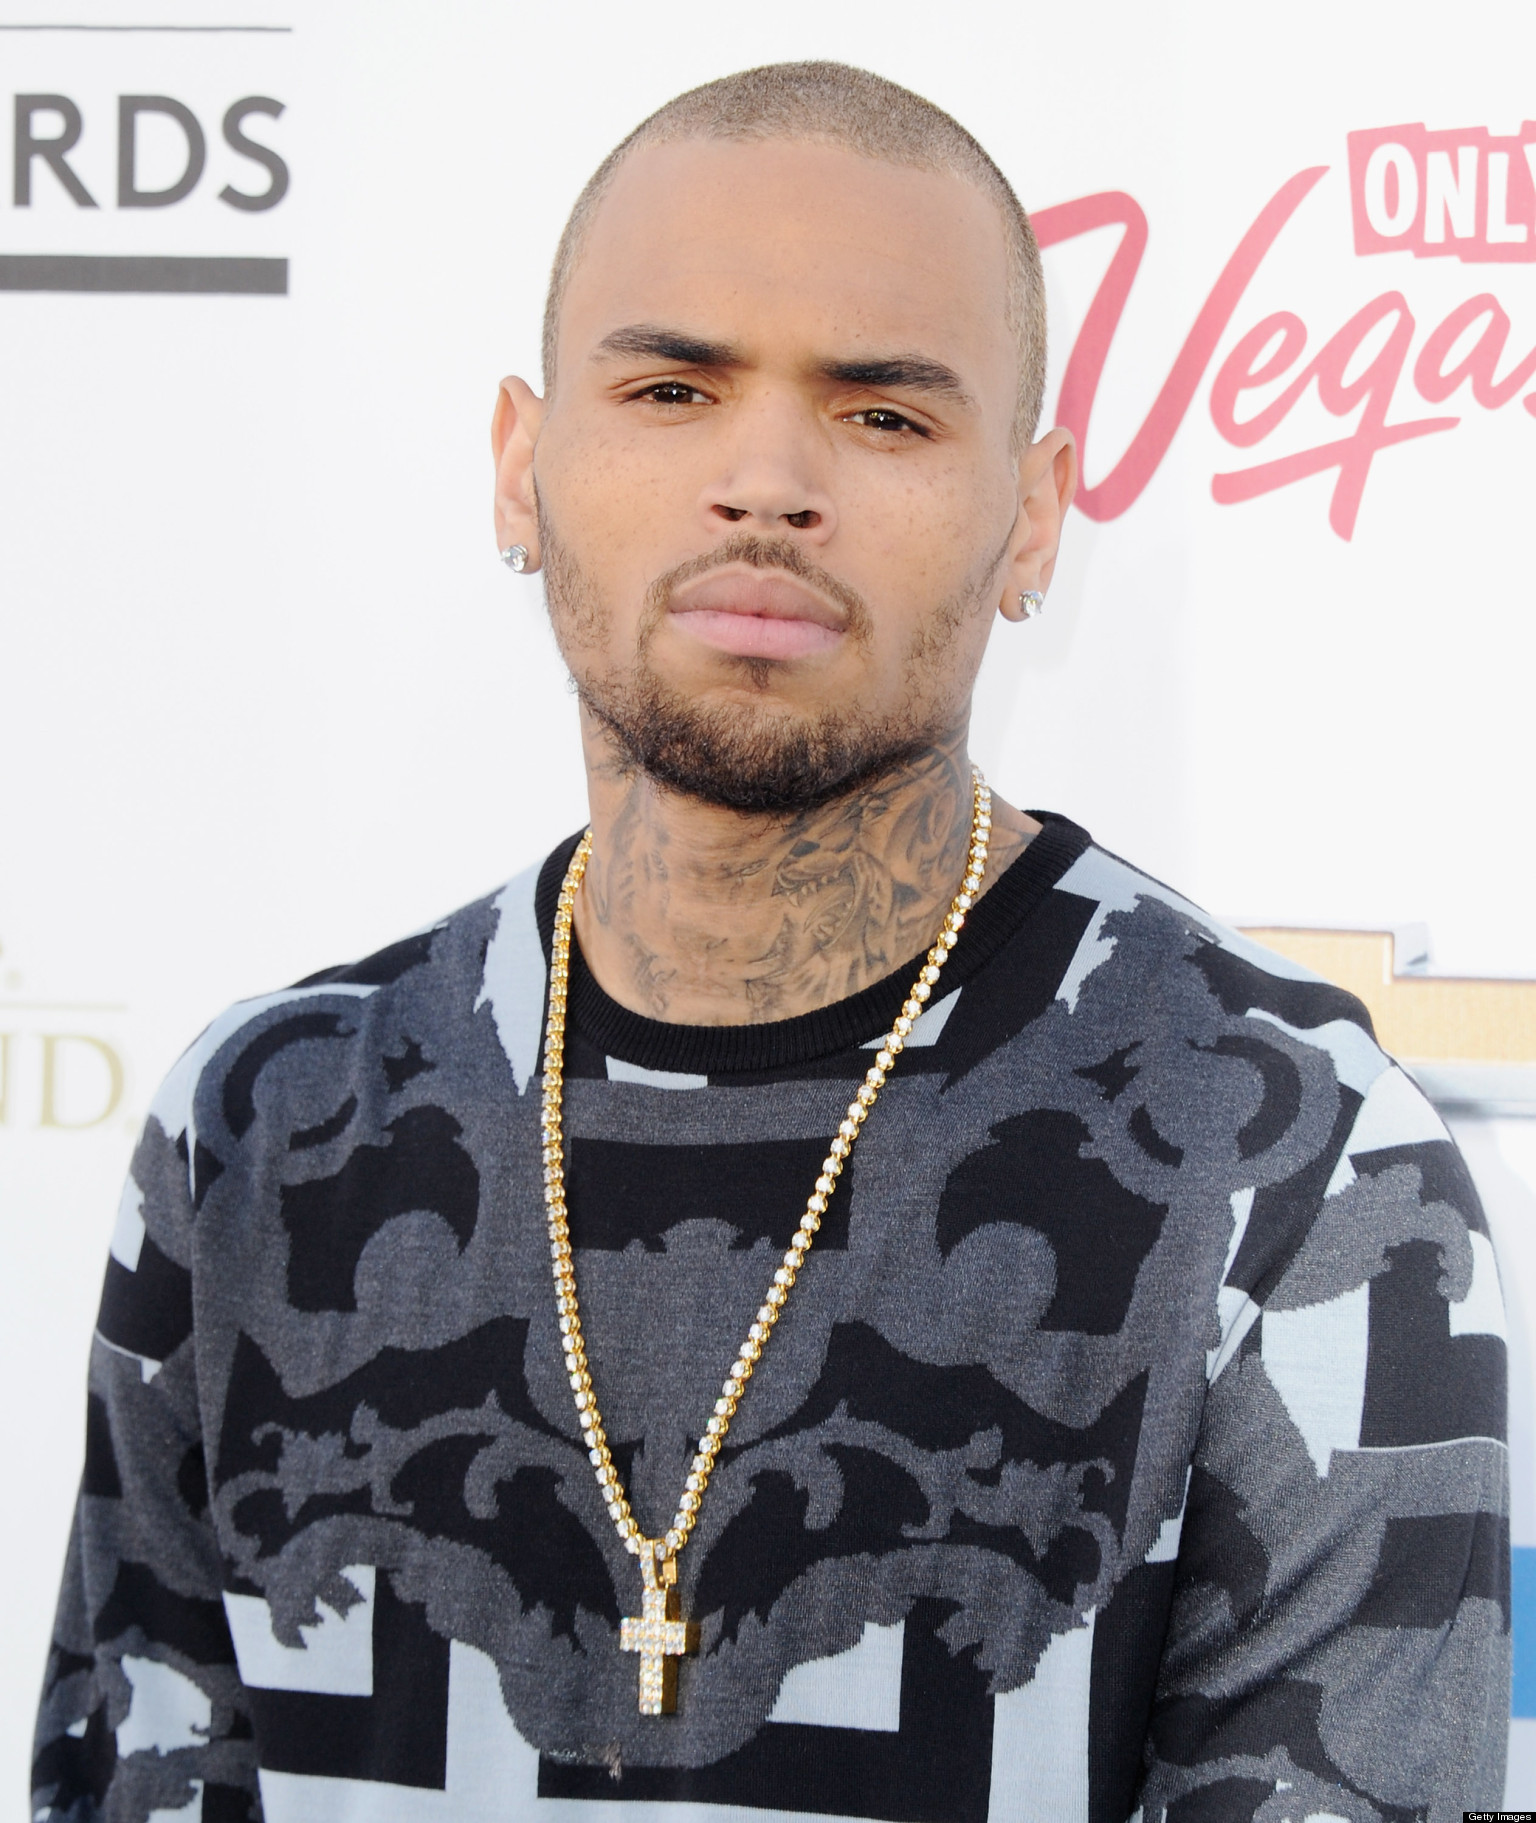 Chris Brown Hit And Run LAPD May Investigate Singers Fender